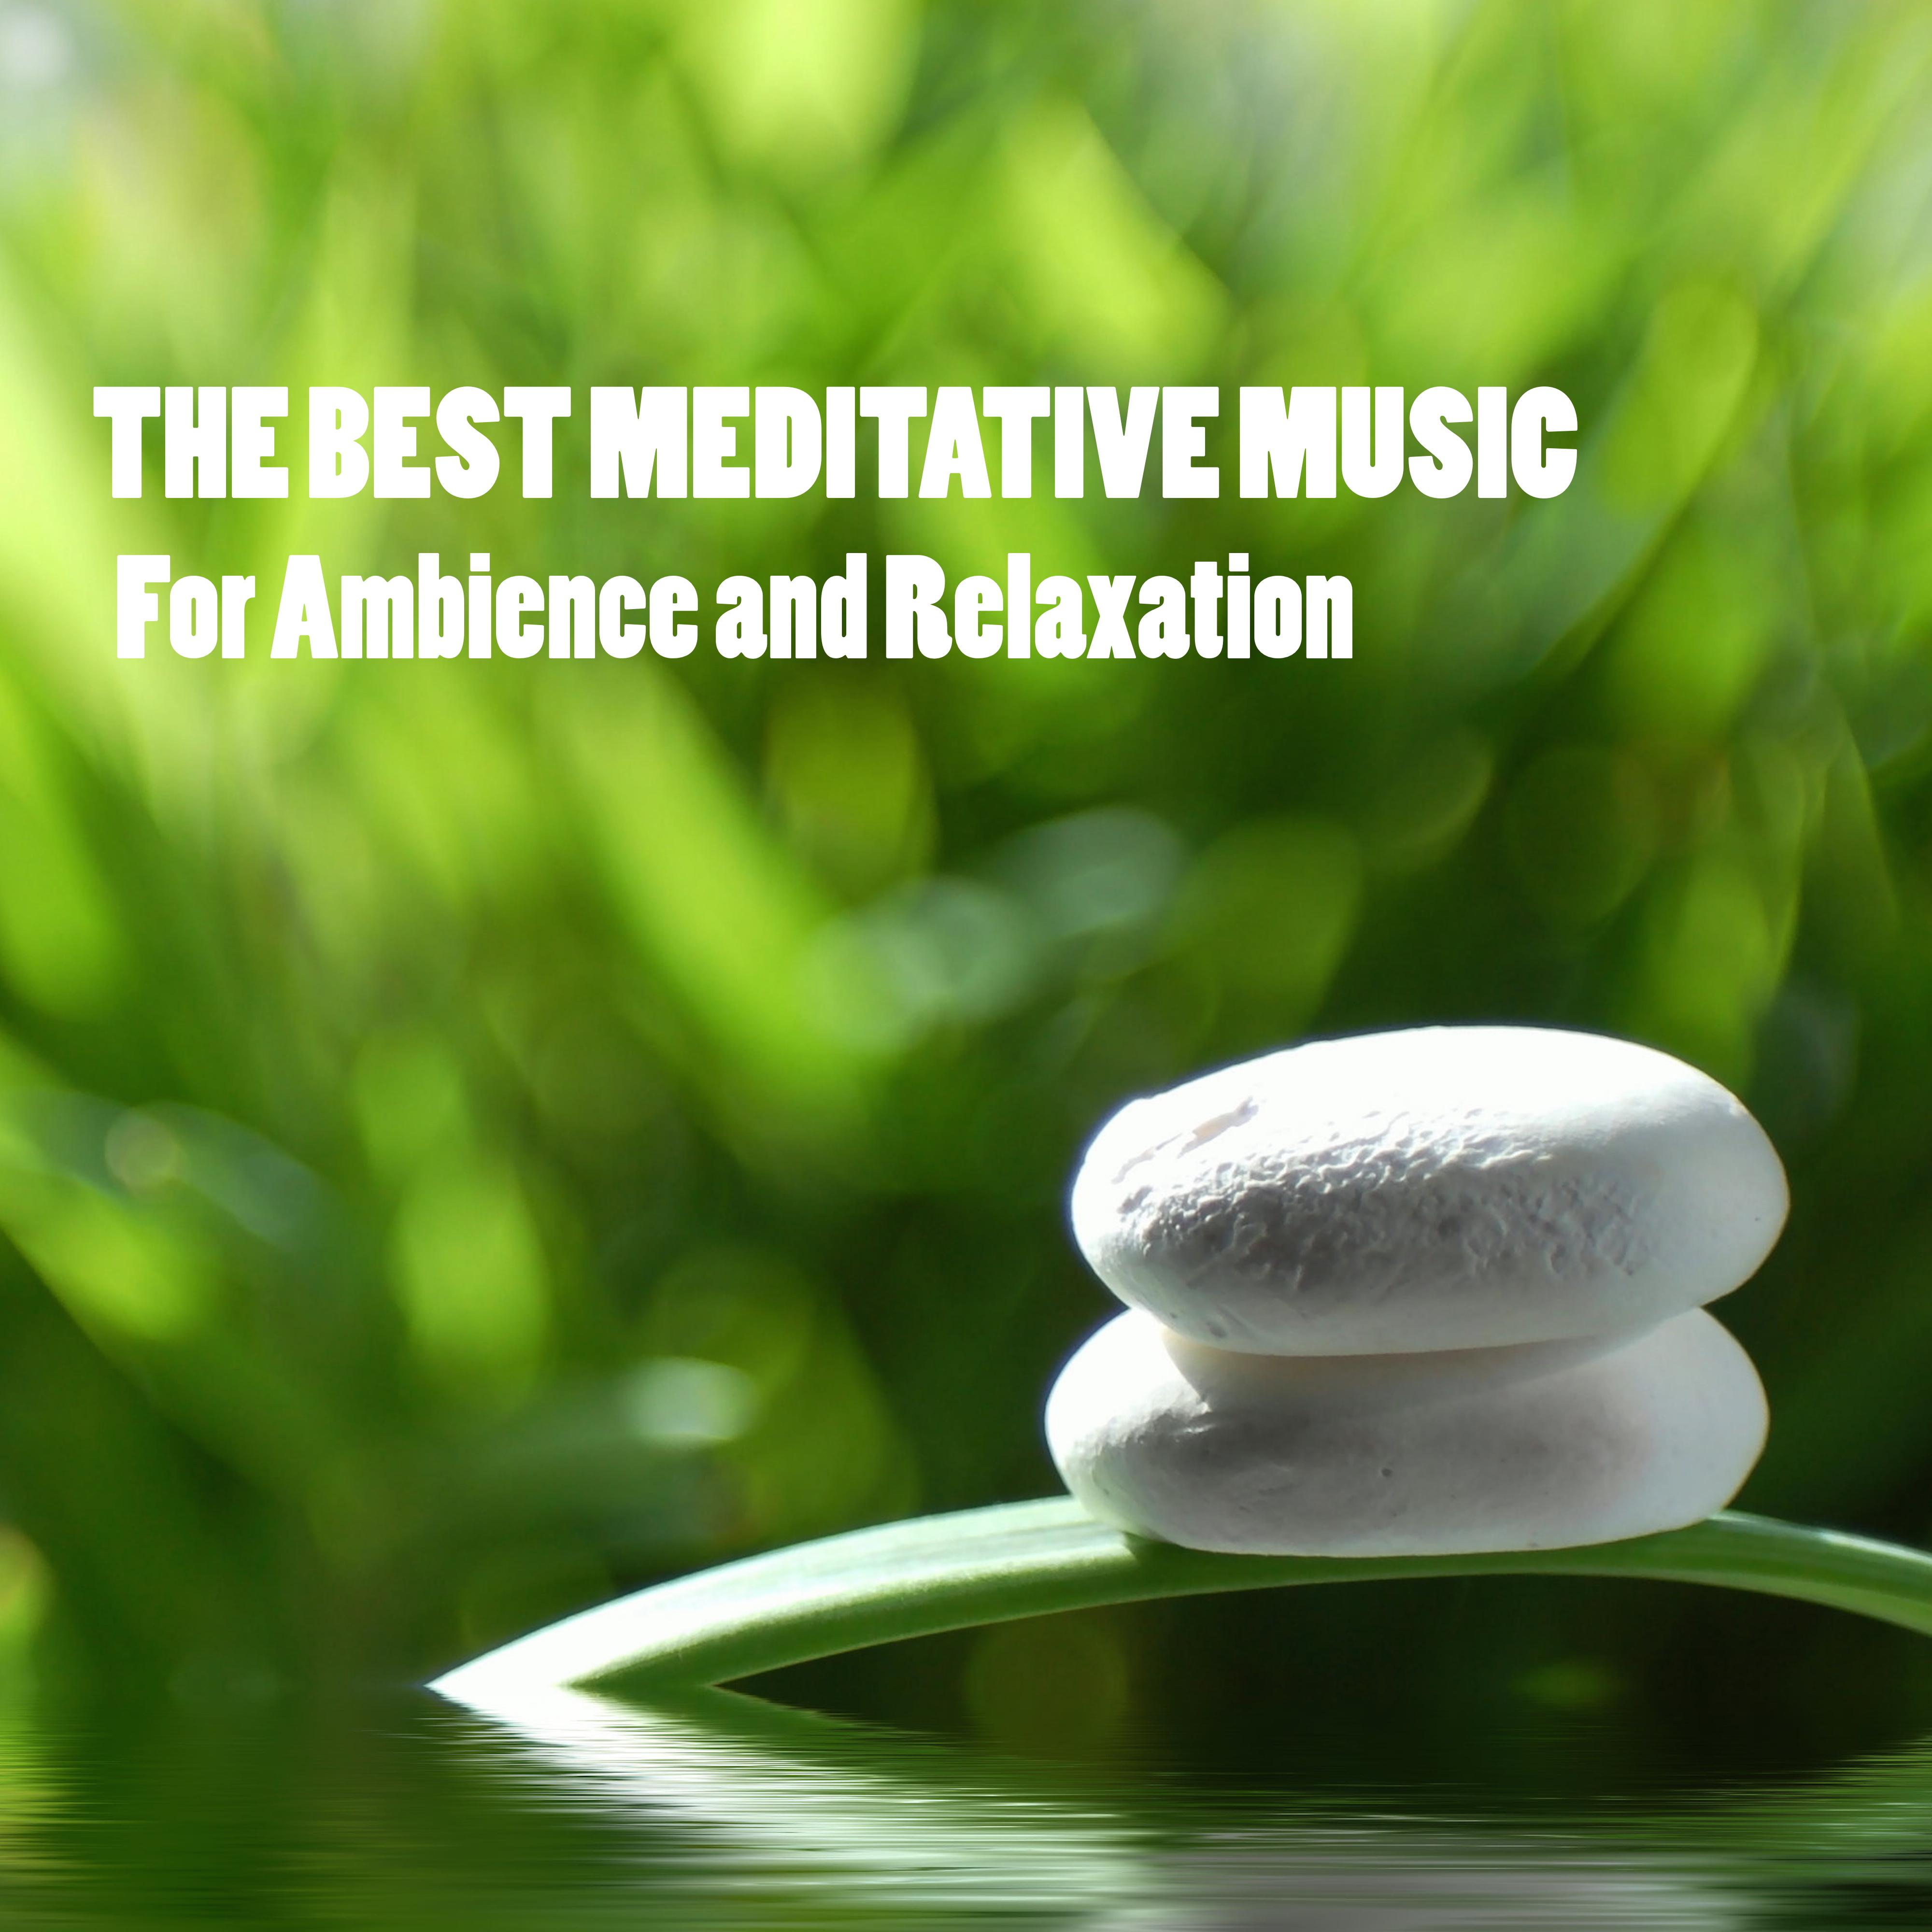 The Best Meditative Music for Ambience and Relaxation